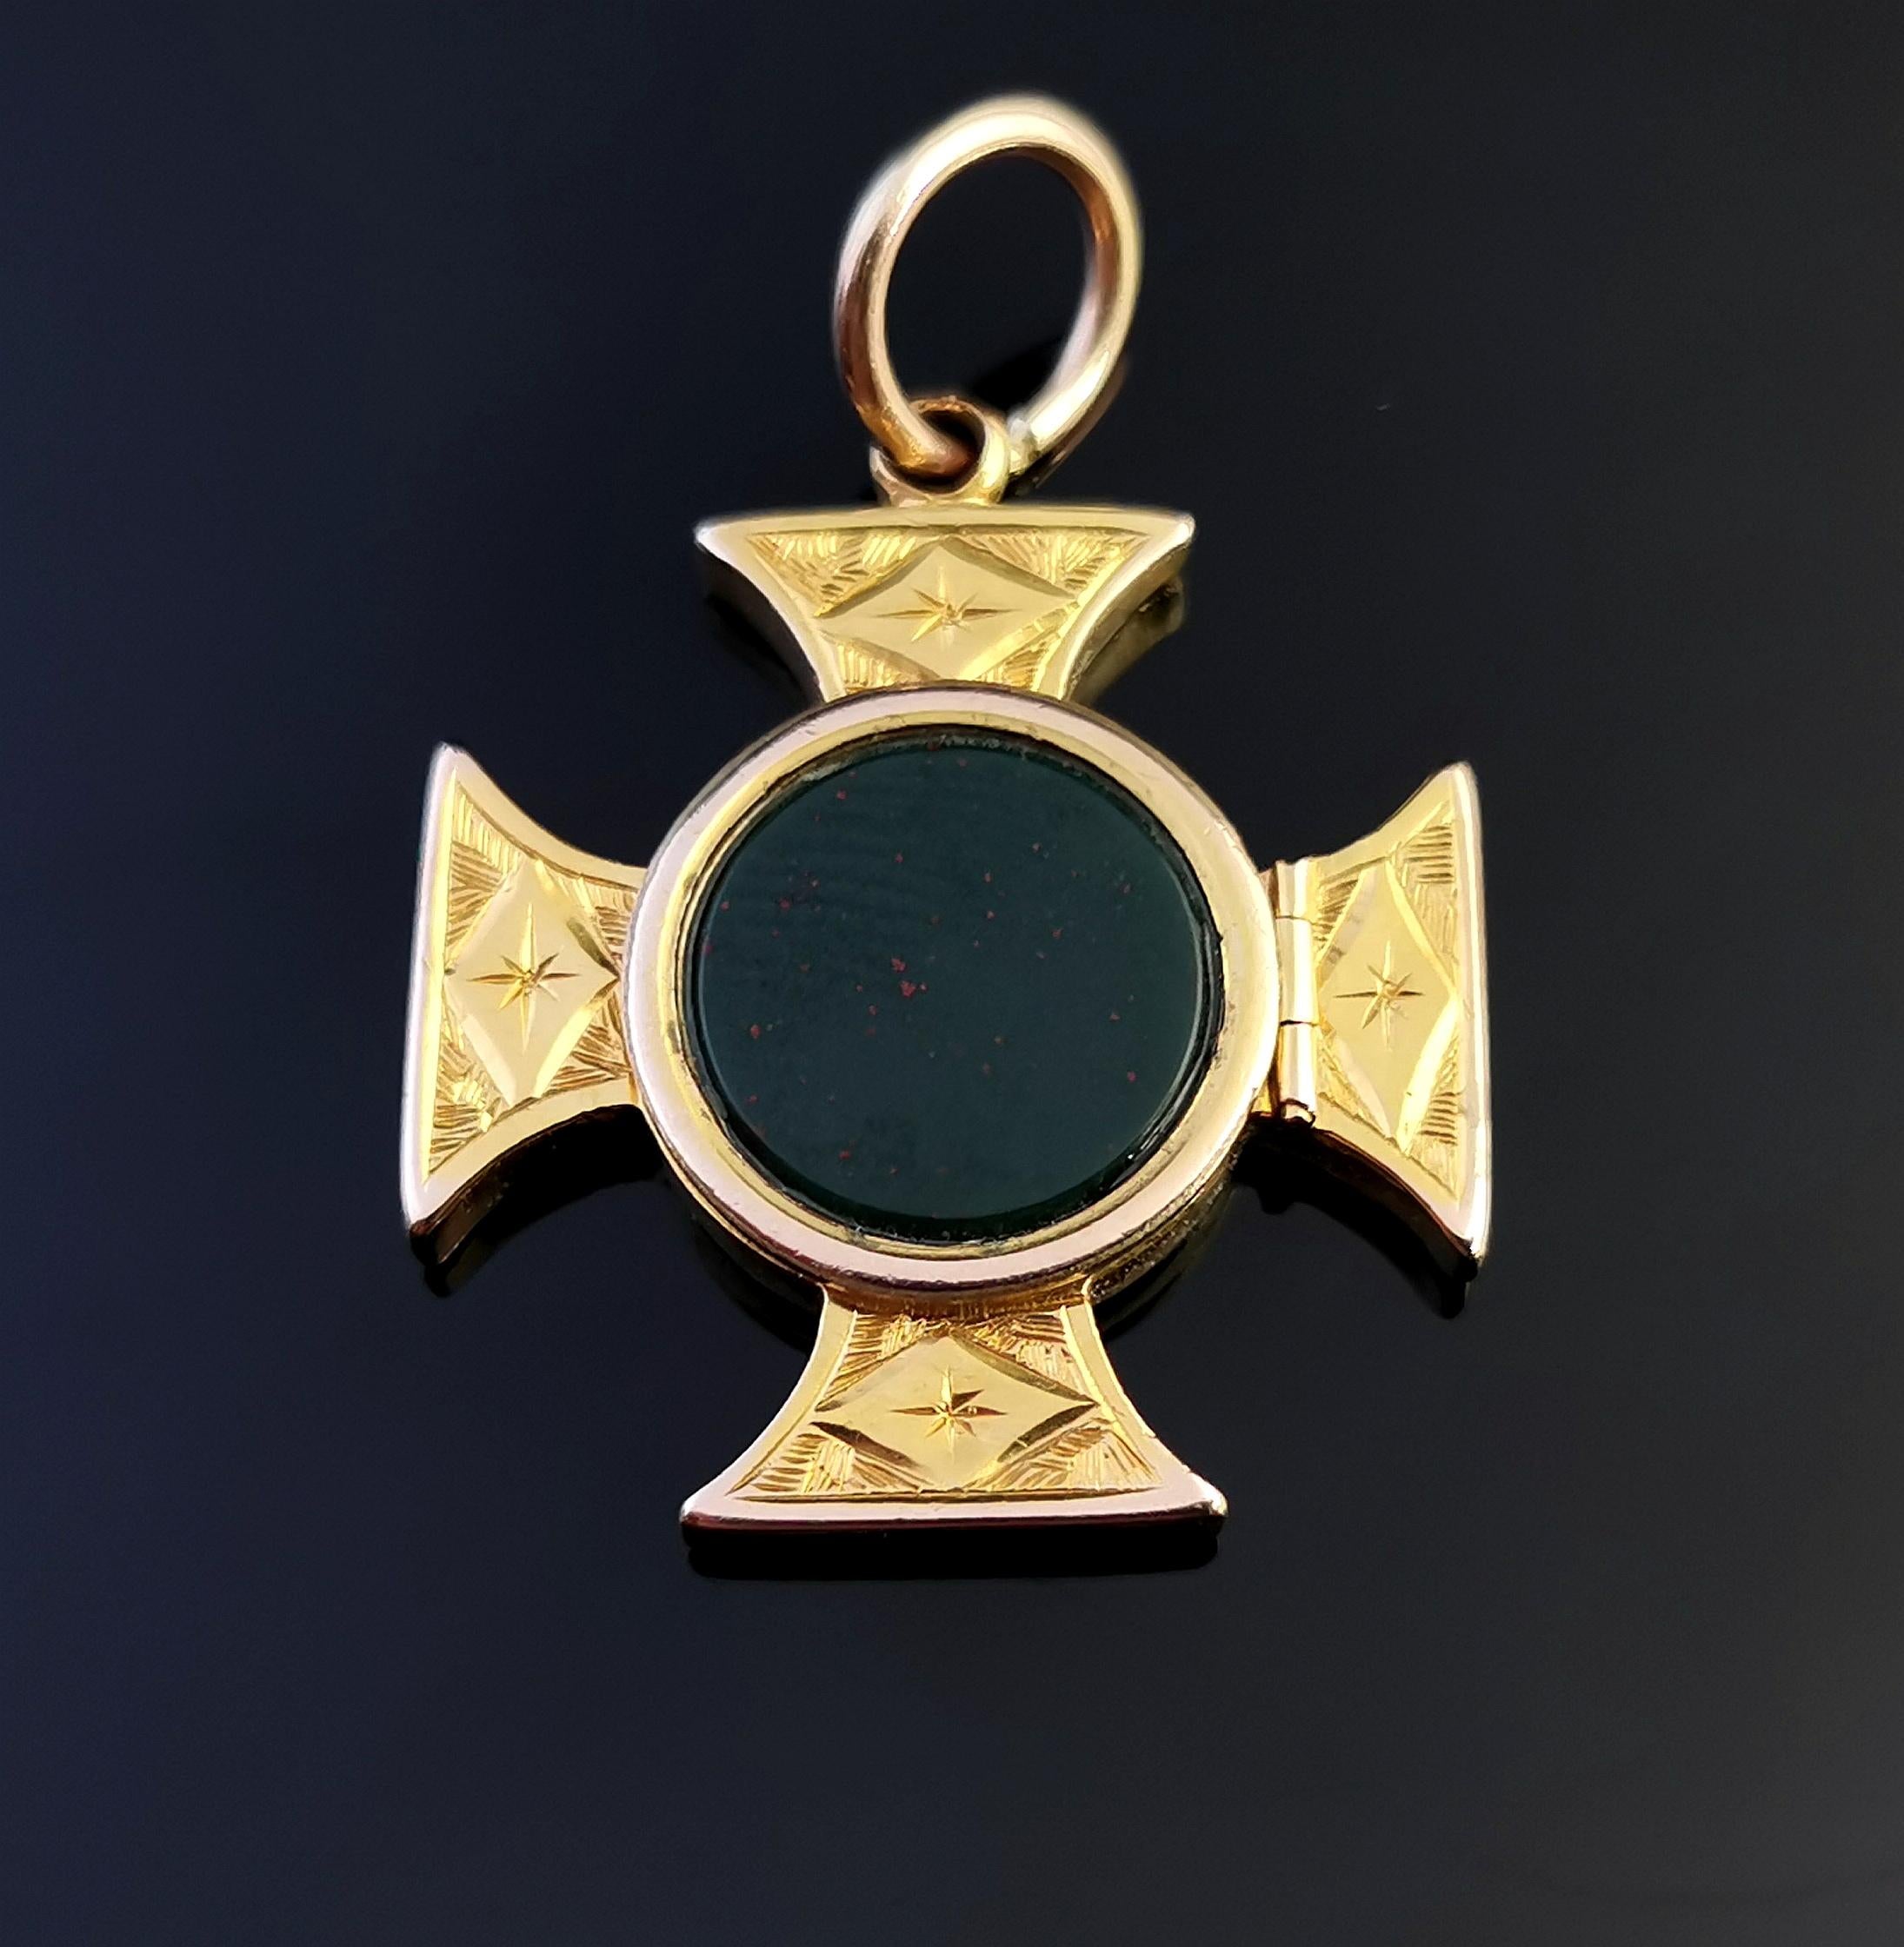 A stunning antique, Victorian era 9kt yellow gold Maltese Cross locket or poison locket.

This attractive pendant is designed as a Maltese Cross with a chased and engraved design of leaves and flora.

The front features a bloodstone slab with a